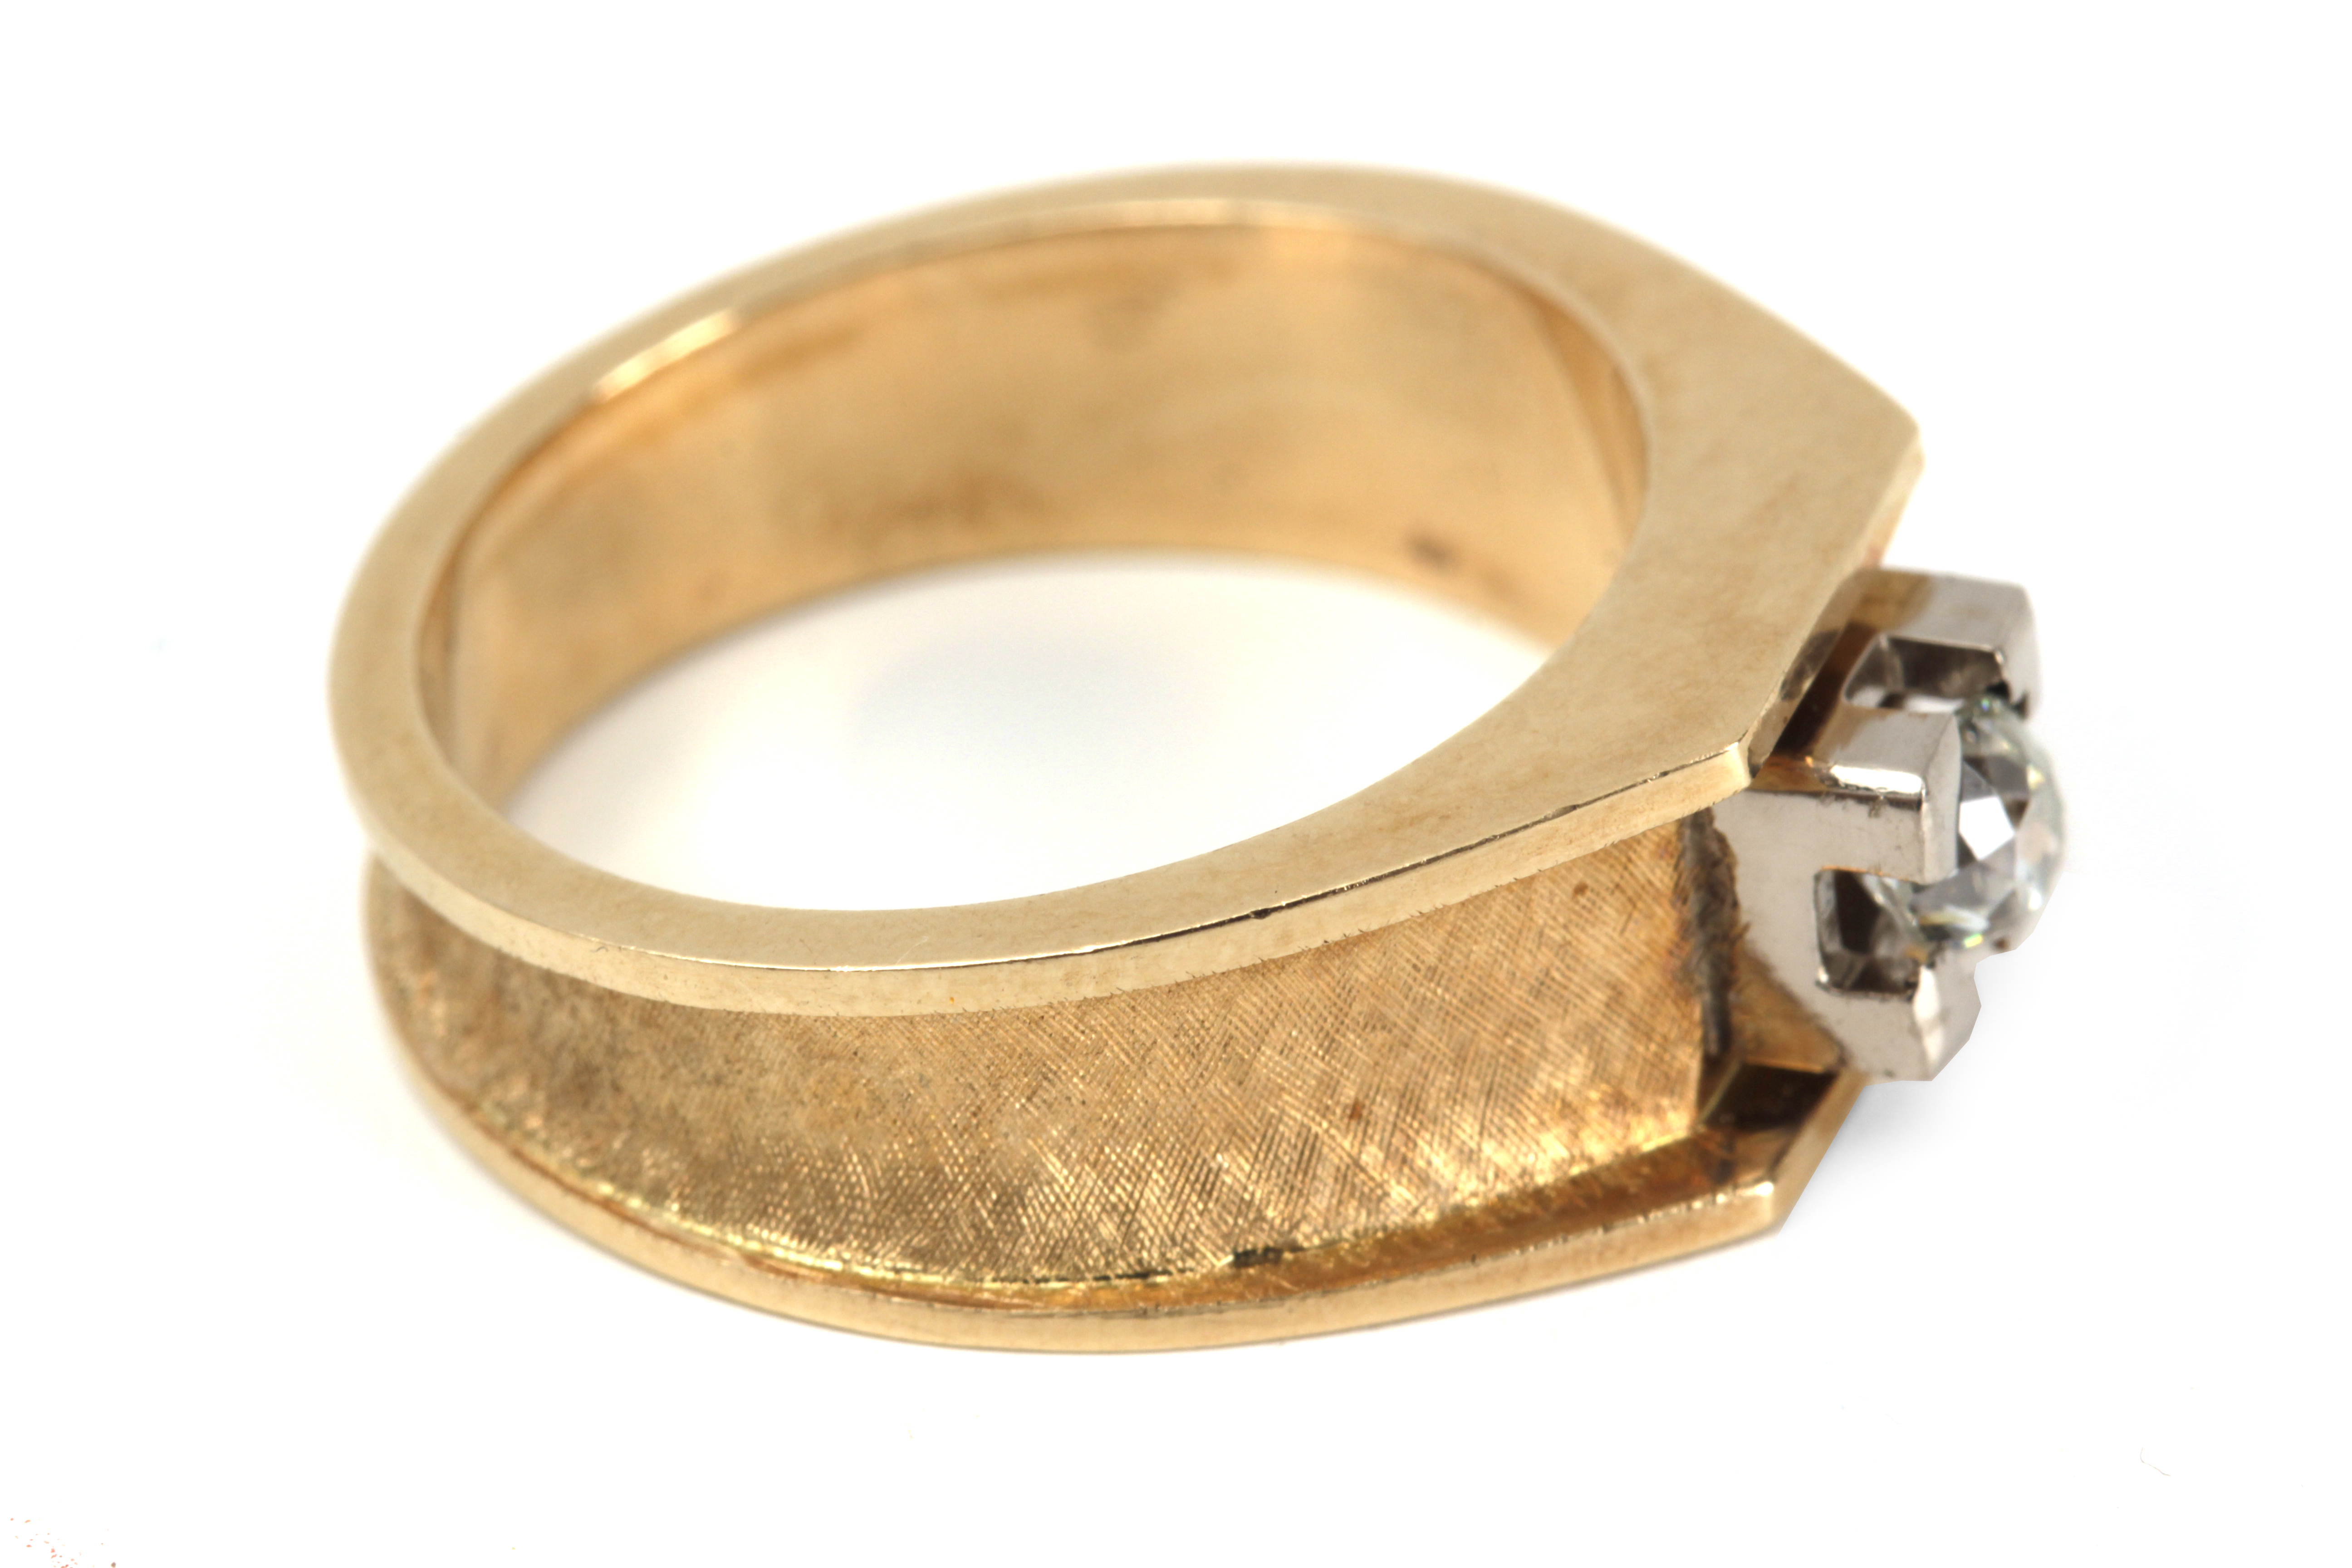 A 0,38 ct. Old European cut diamond solitaire ring with an 18k. yellow gold and platinum setting - Image 3 of 4